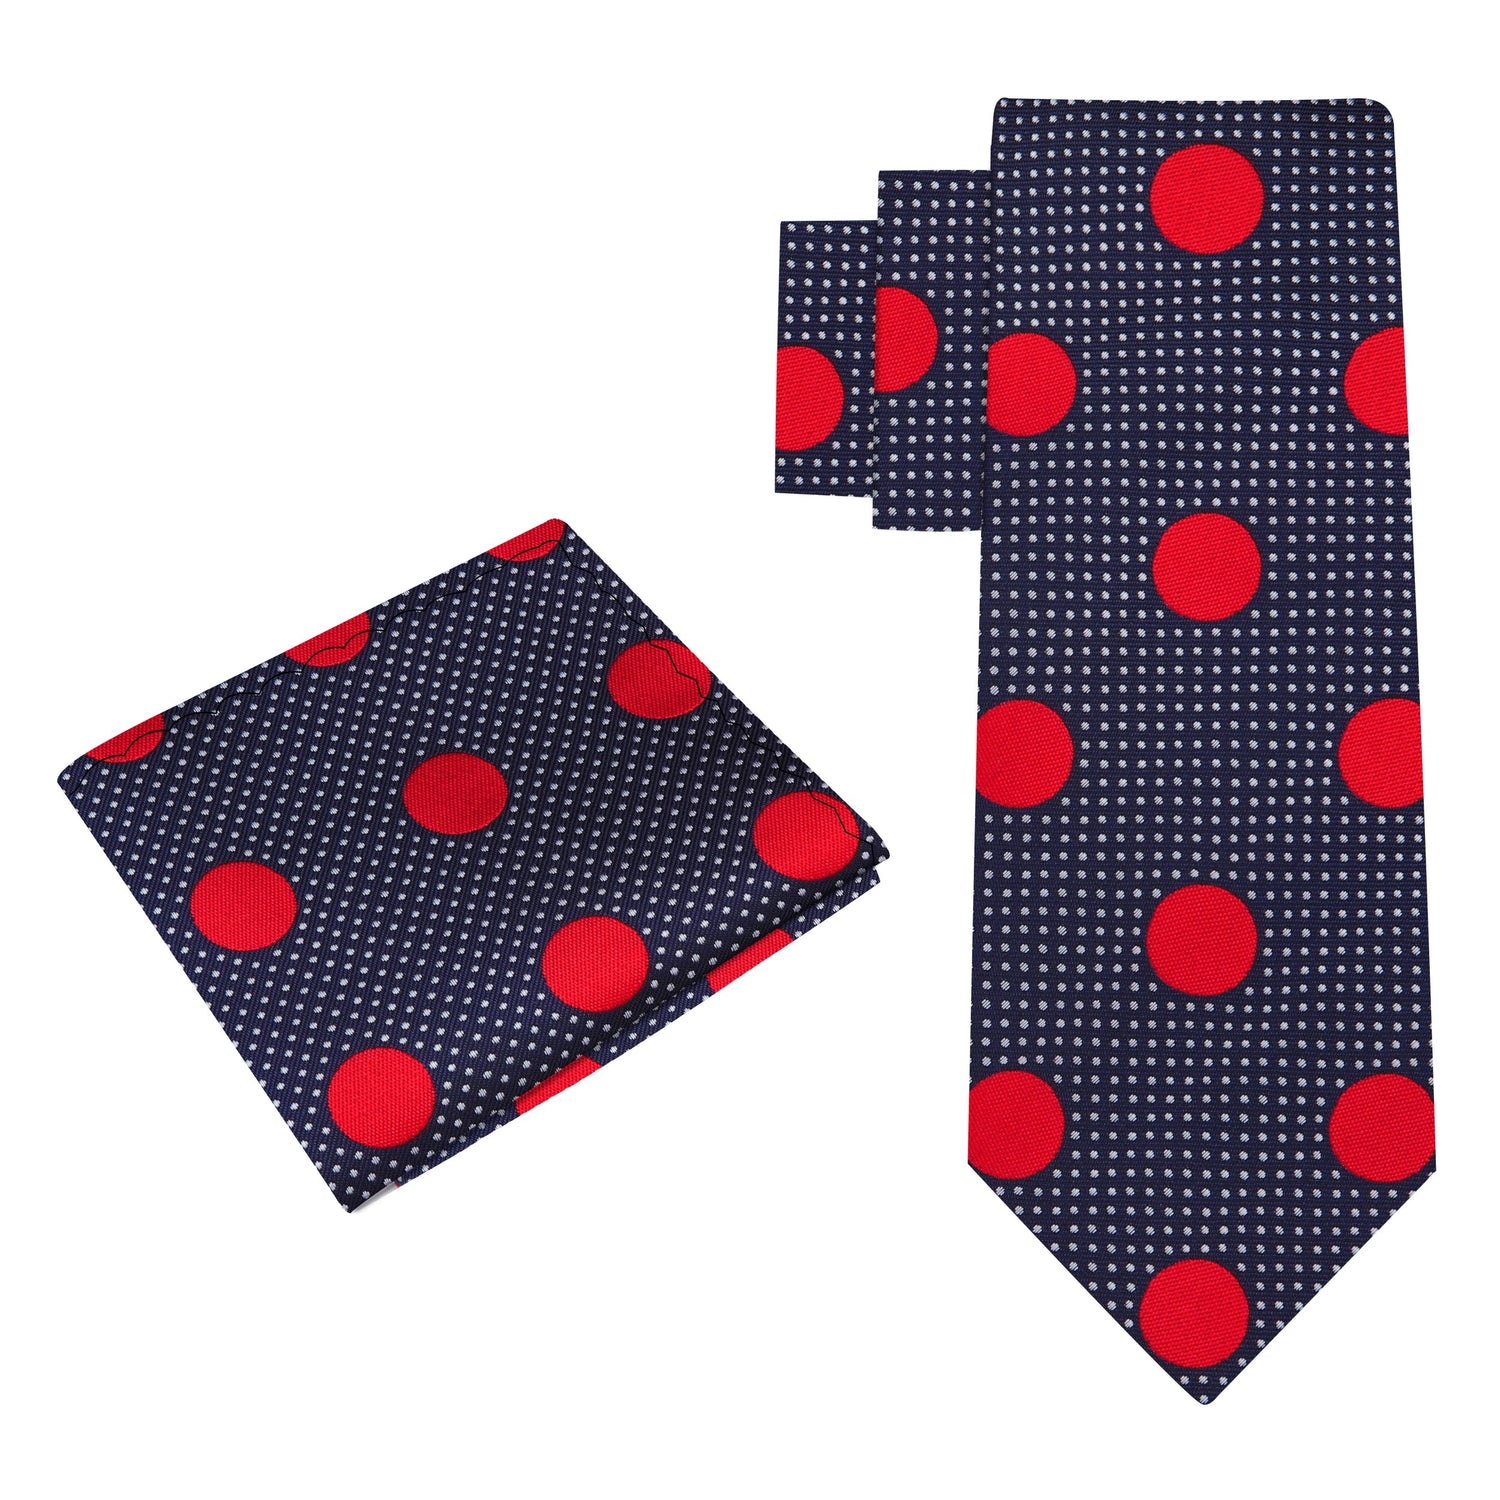 Alt View: navy, red polka tie and square